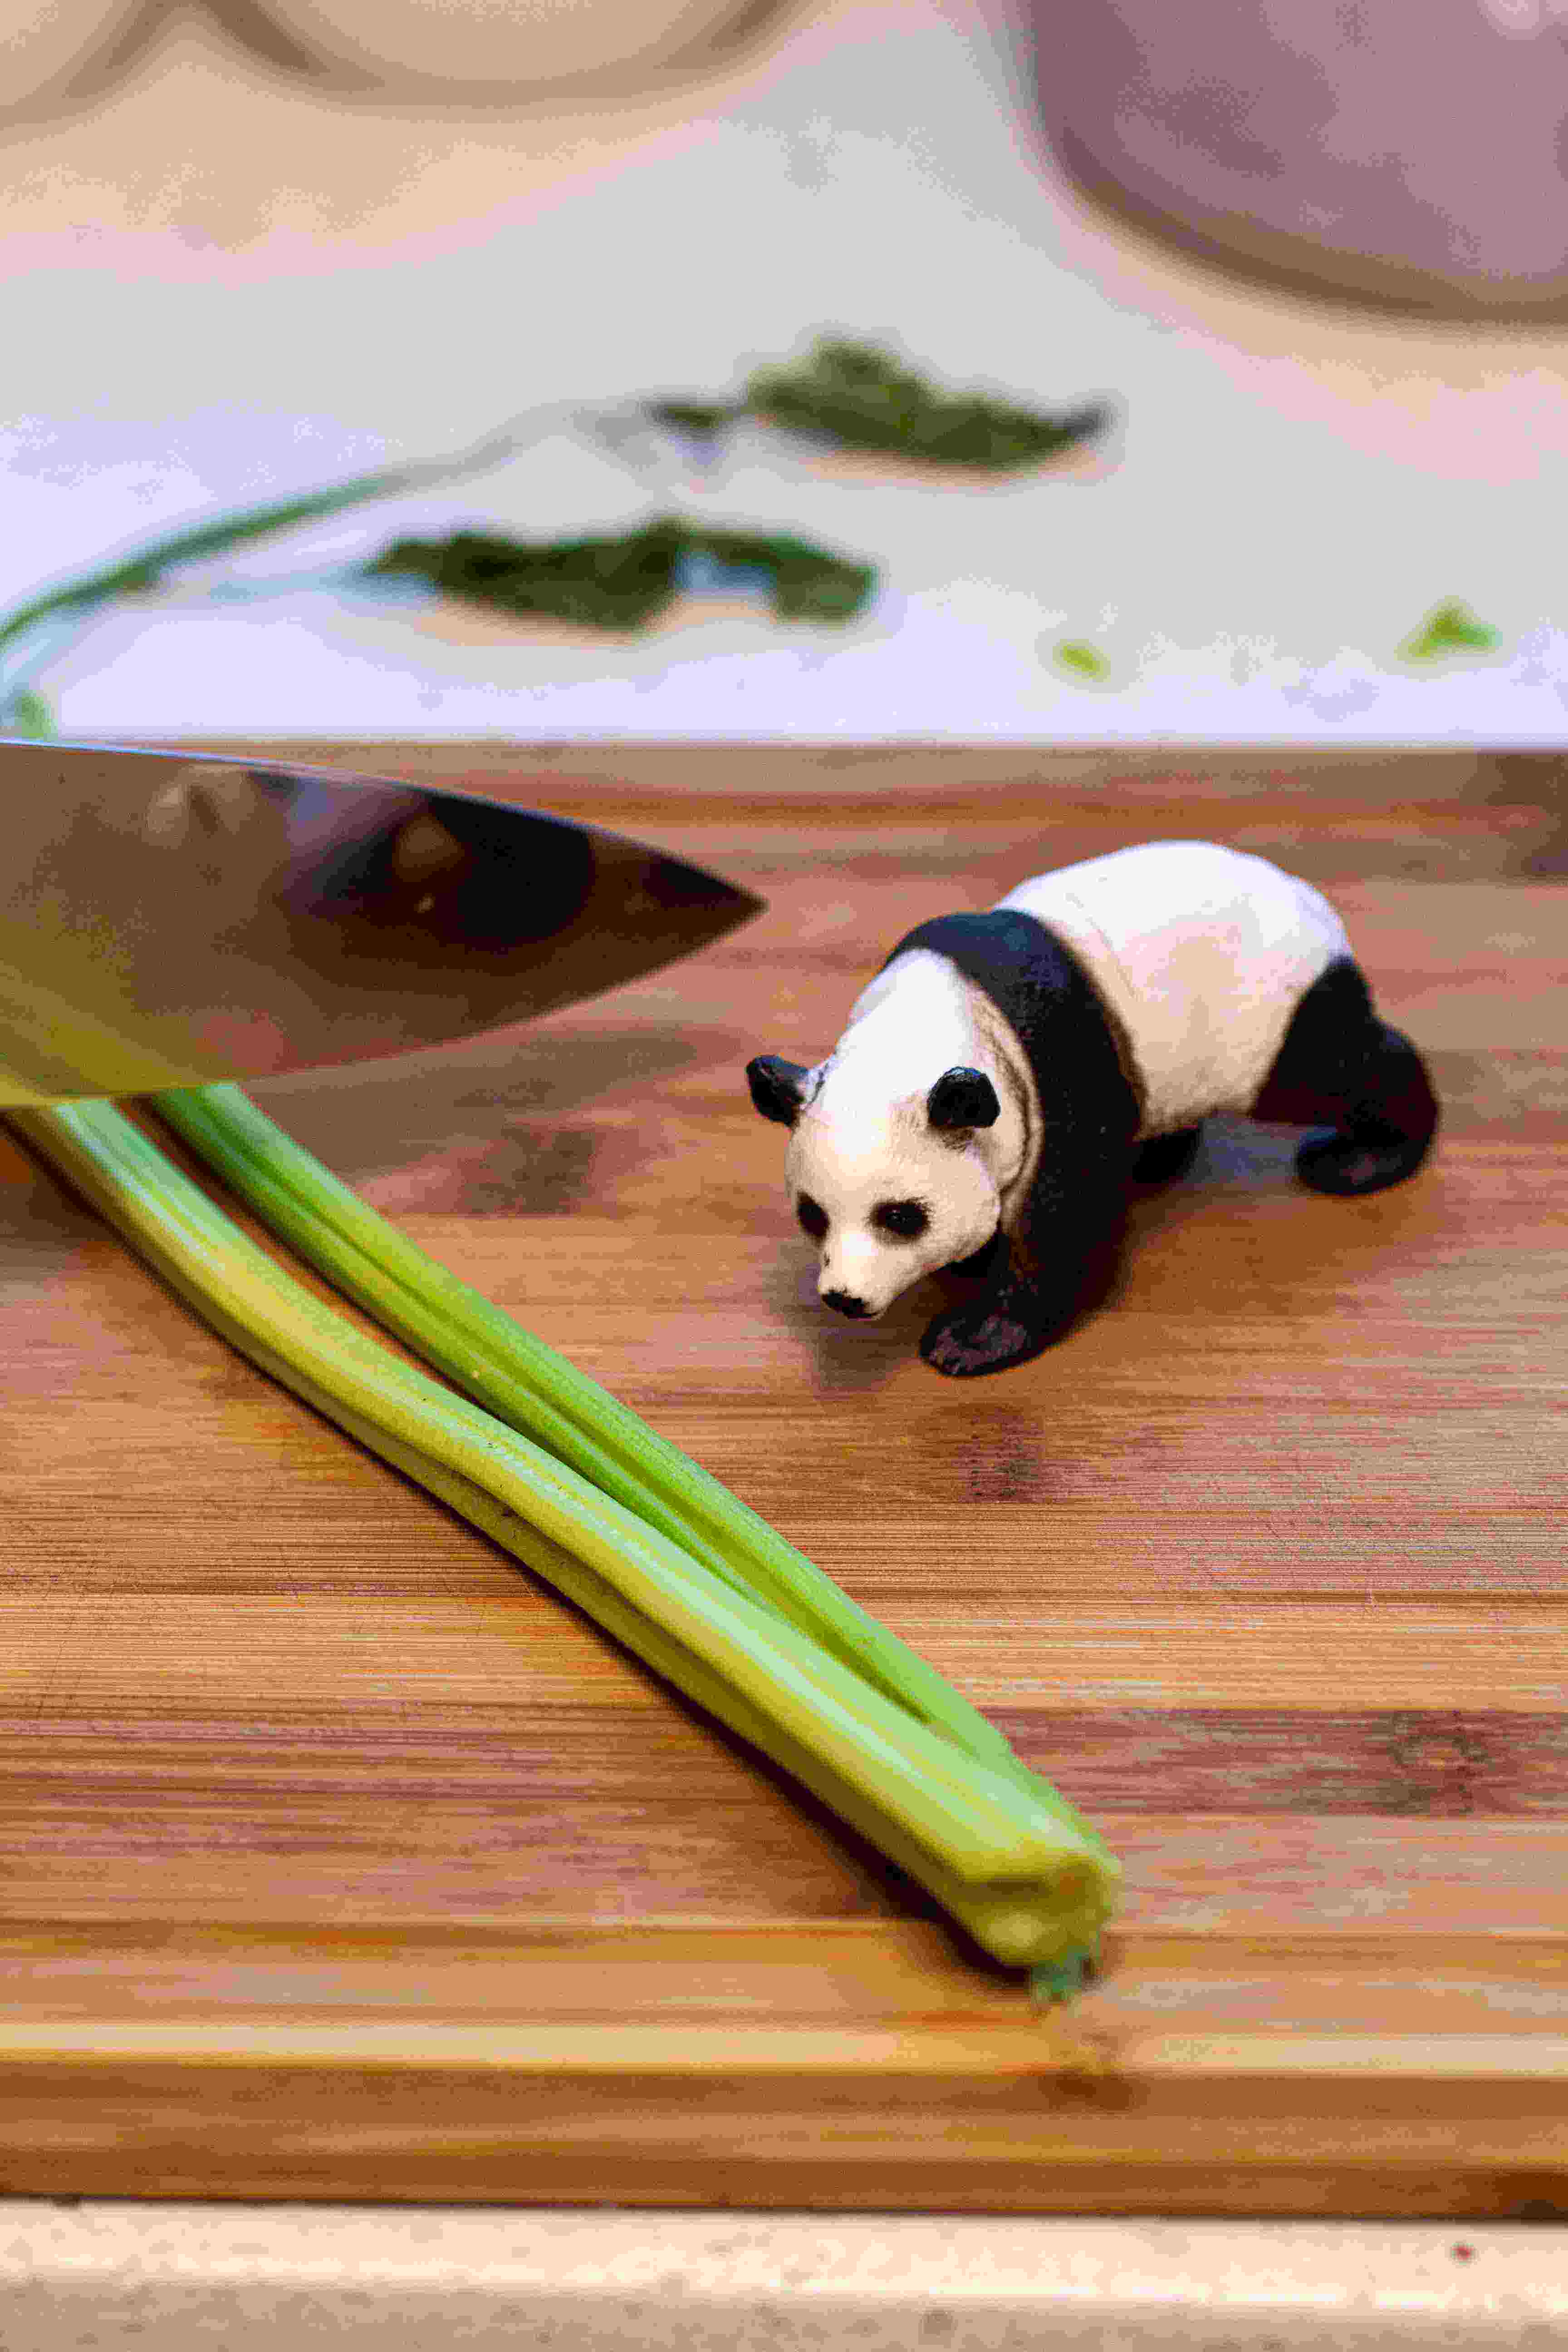 Toy panda on cutting board with knife
            and cilantro